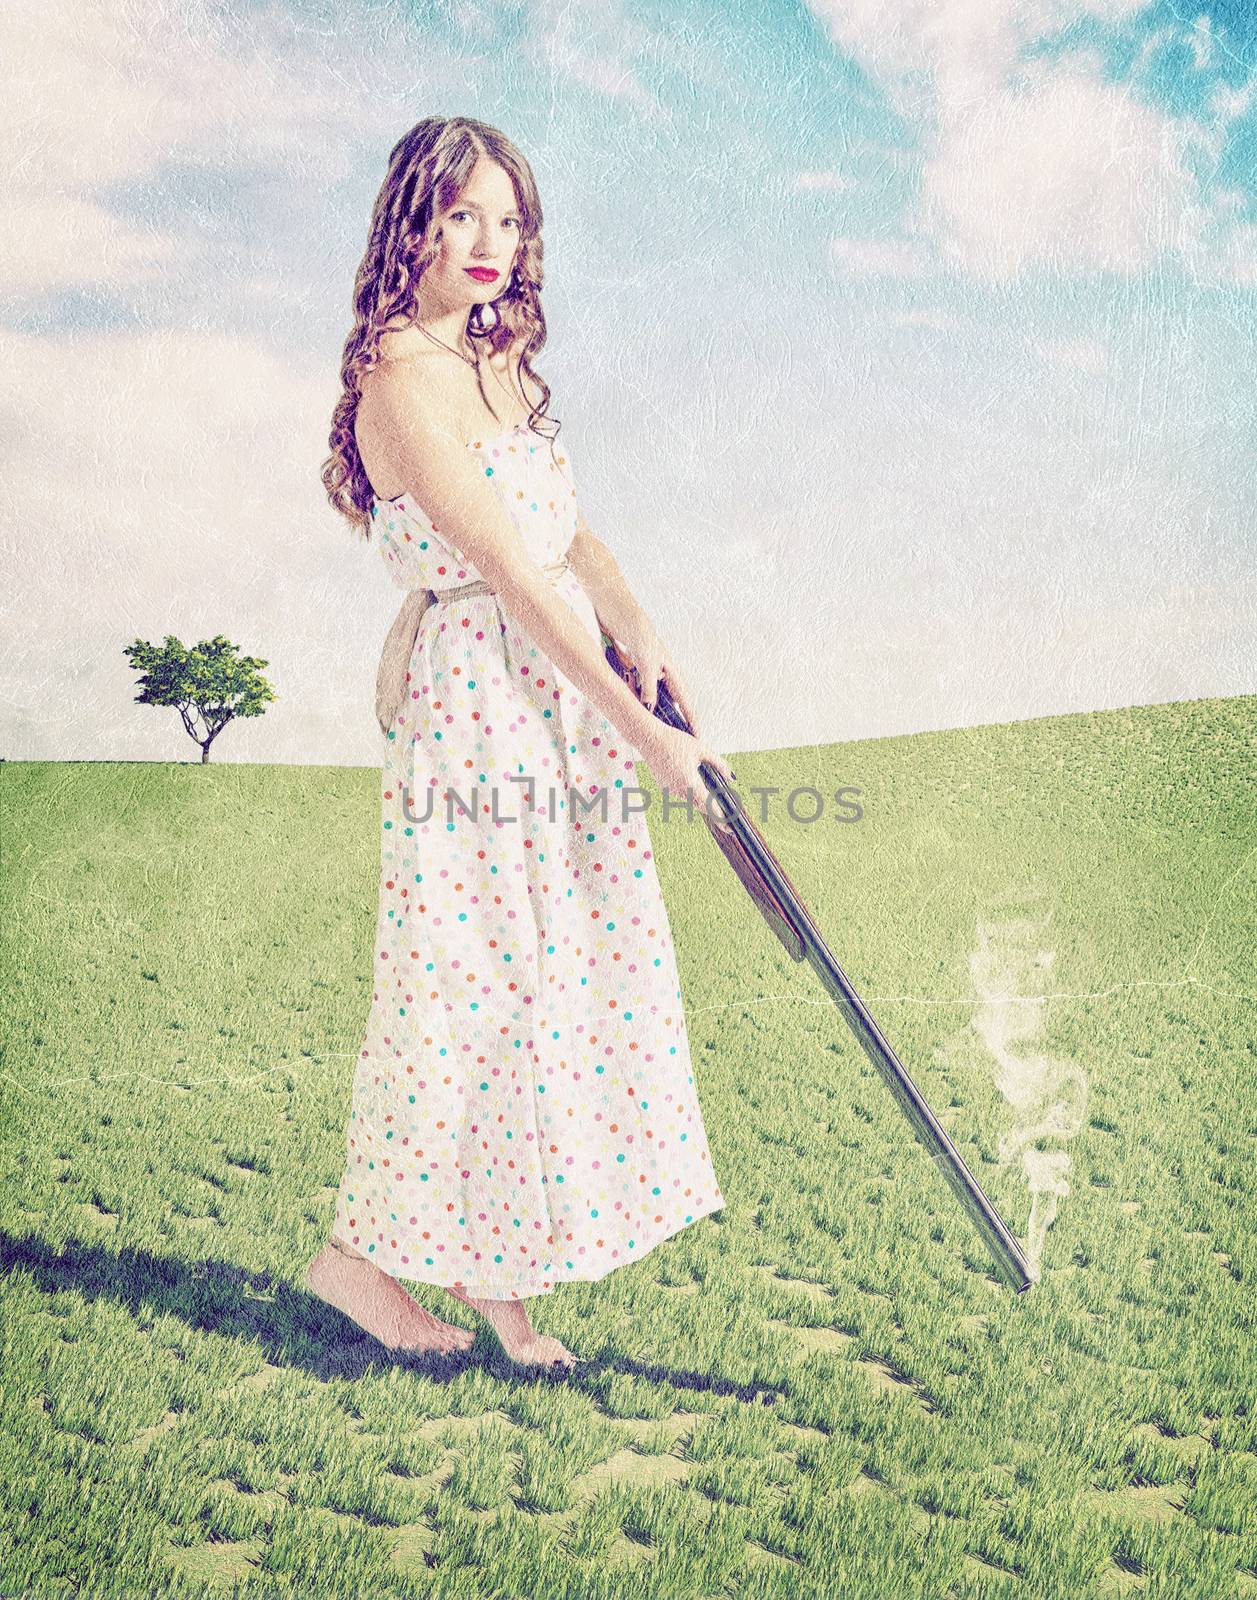 Vintage card syile- beautiful young girl hunter . Creative concept photo and cg elements combinated